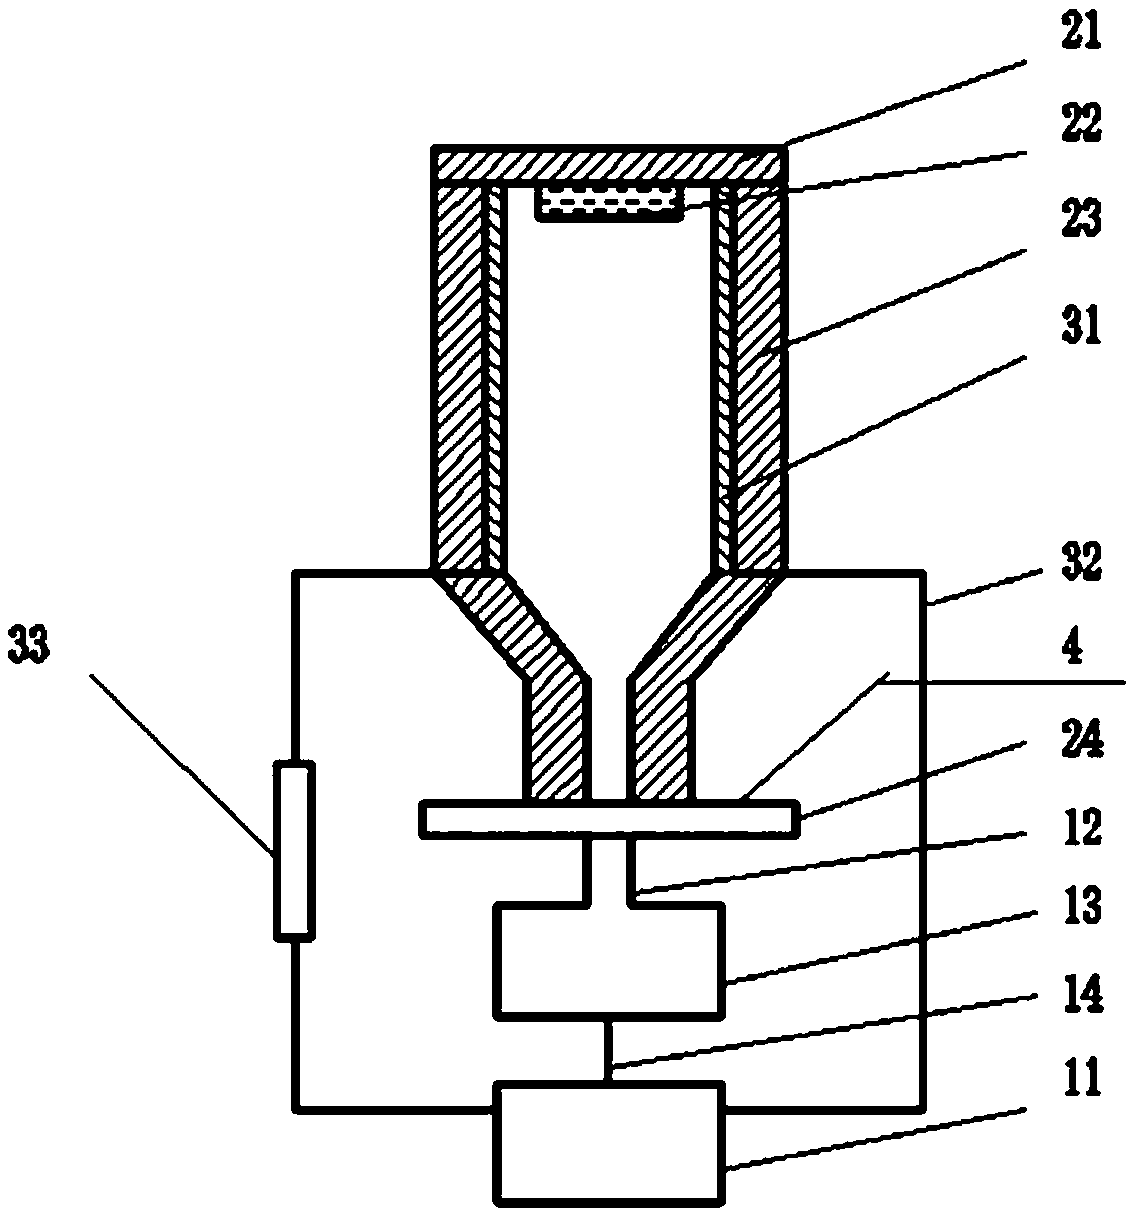 Powder feeder capable of drying and preheating powder based on laser additive manufacturing and powder feeding method